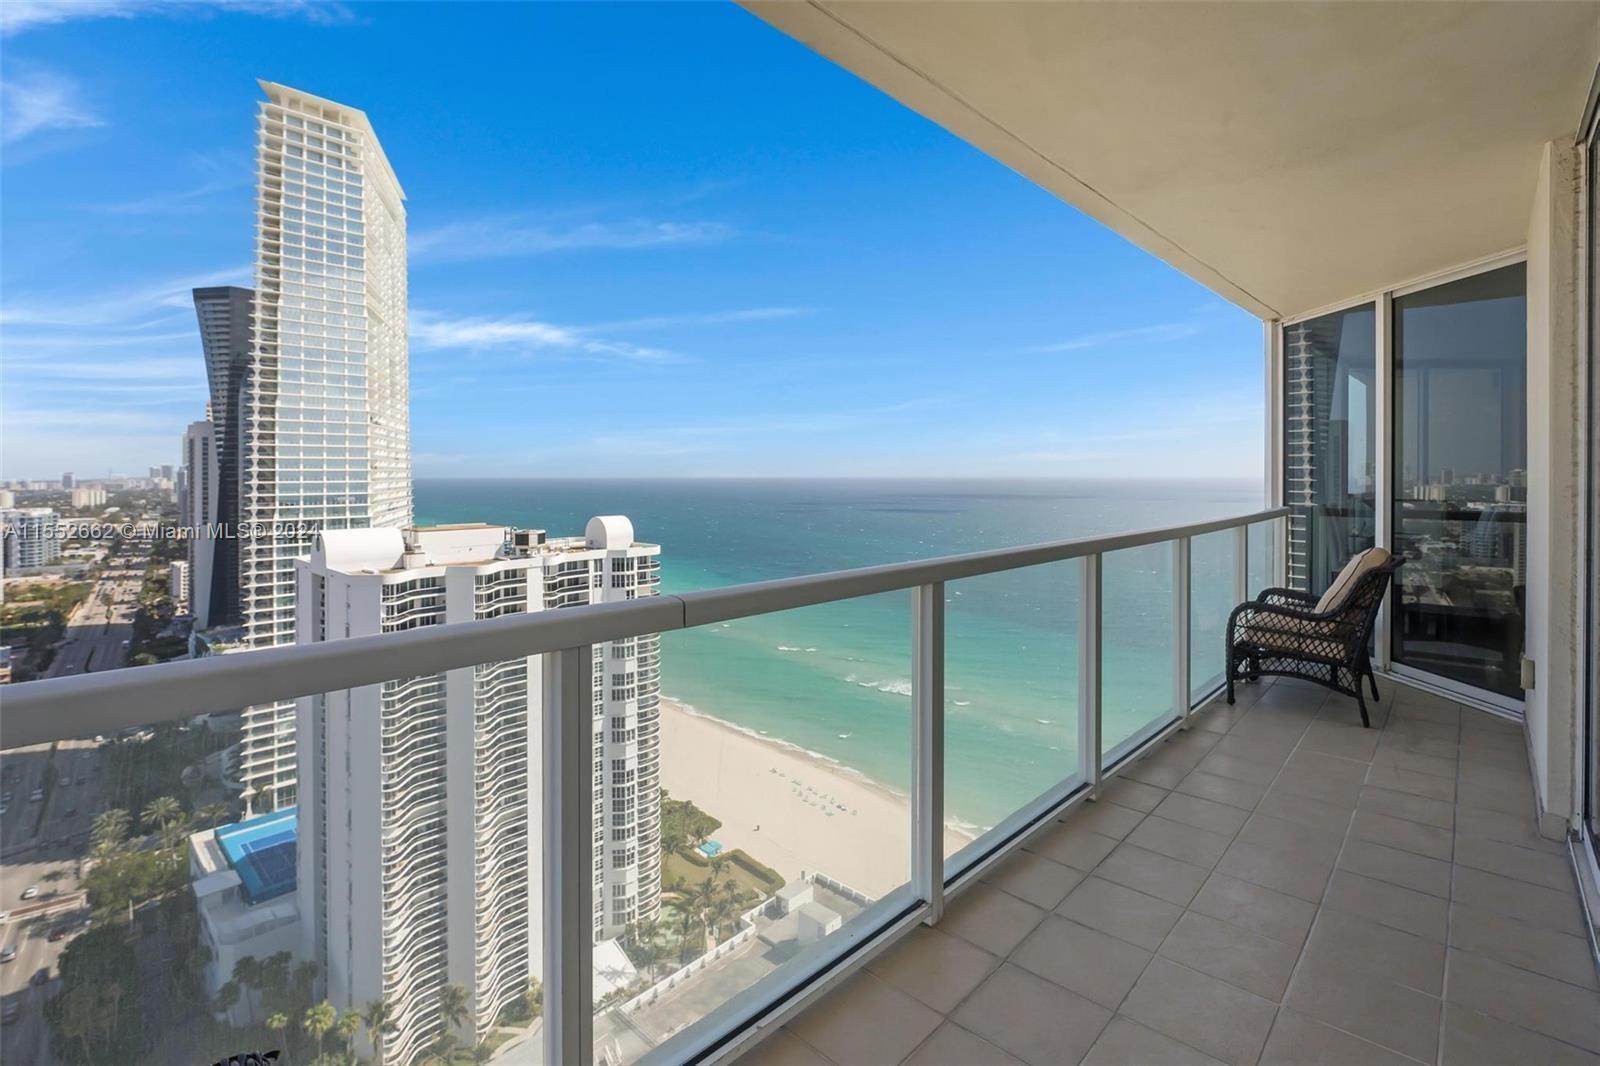 Property Image for 16699 Collins Ave 3407